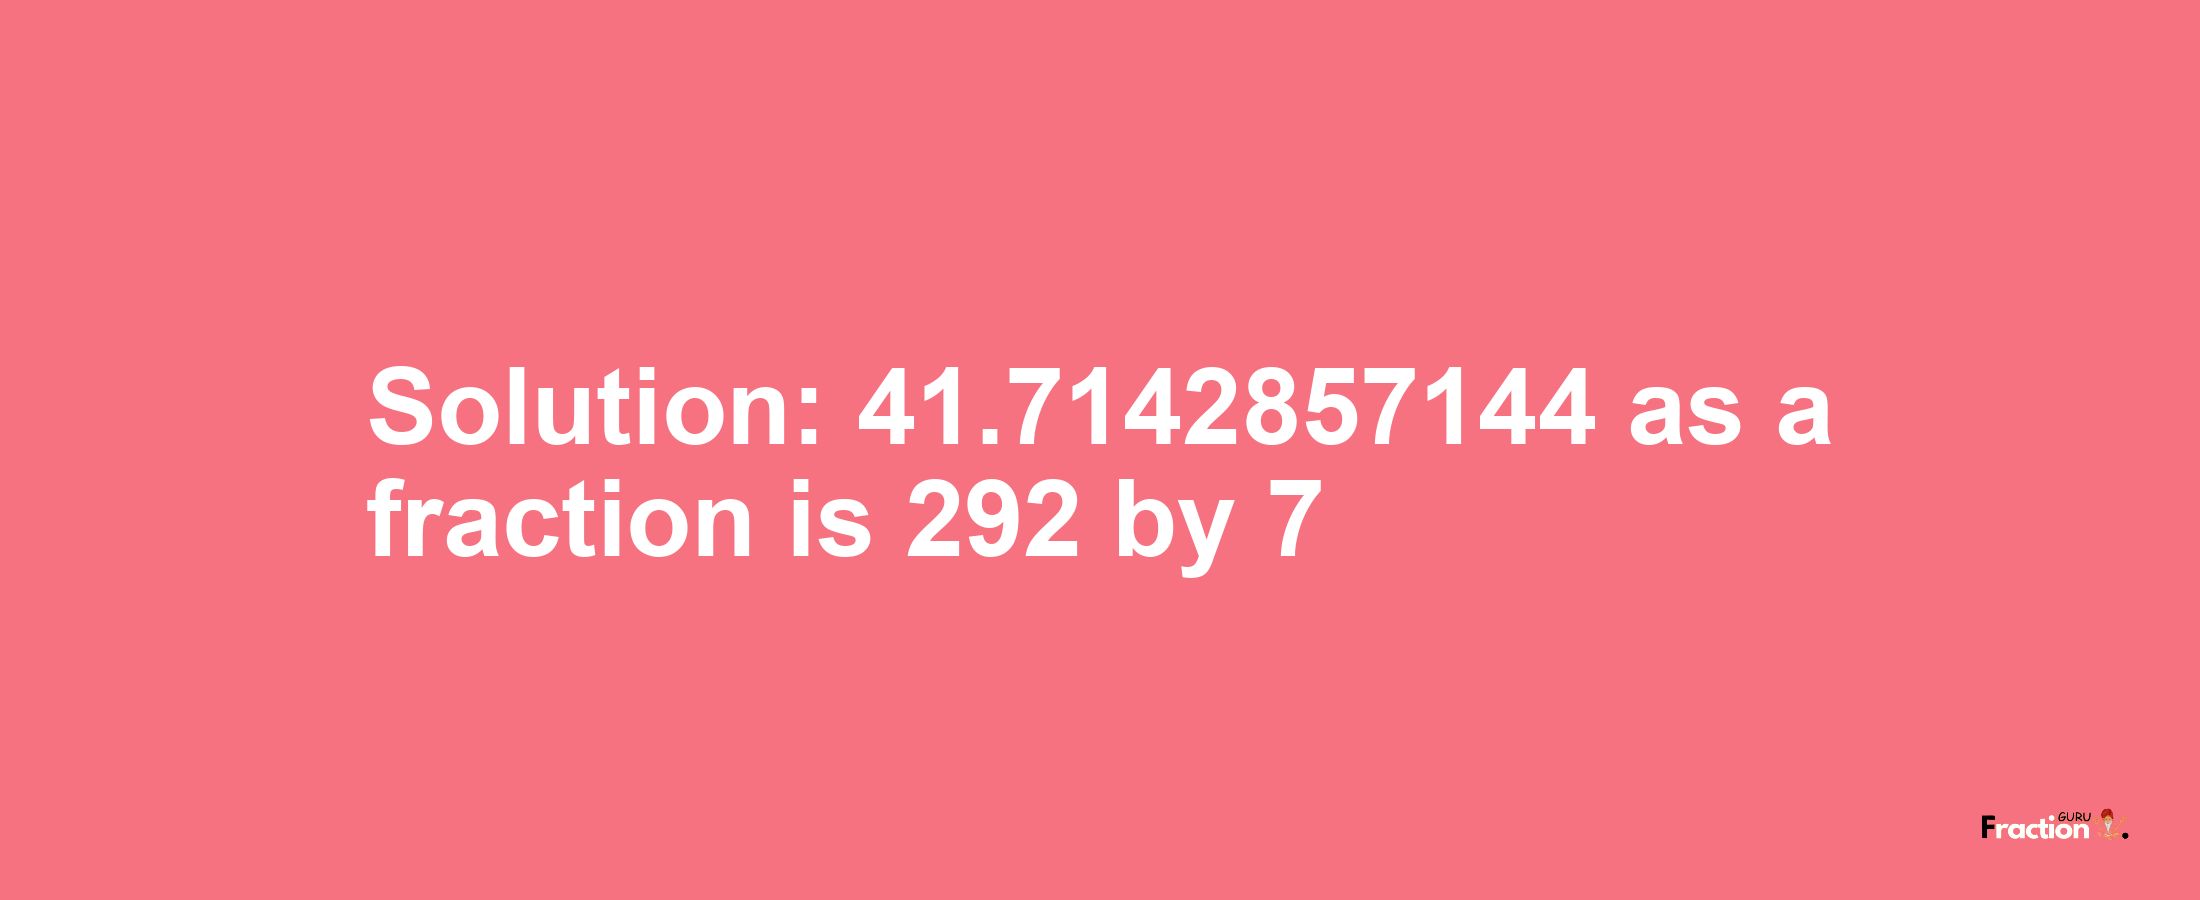 Solution:41.7142857144 as a fraction is 292/7